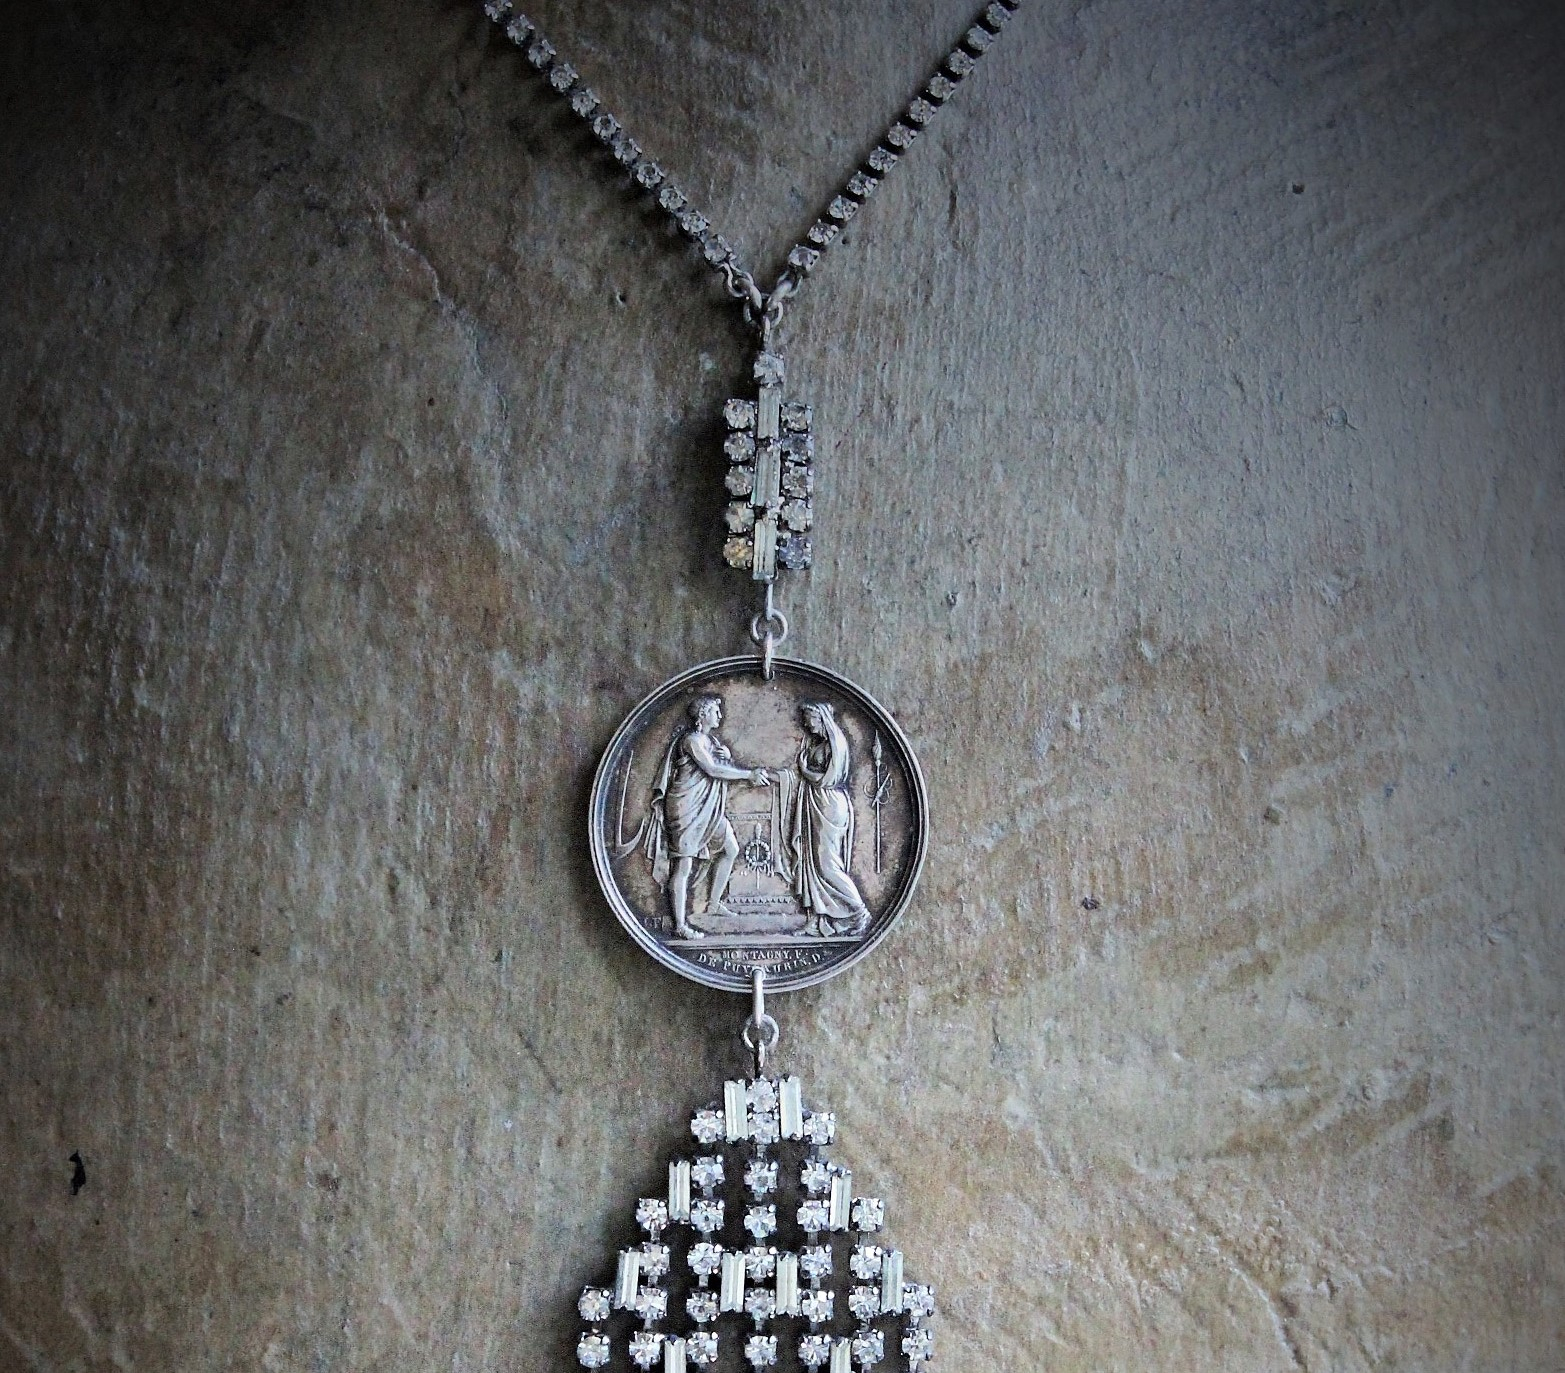 Love is Sufficient Necklace w/Antique French Union Monogrammed Medal,Antique Faceted Rhinestone Findings,Antique Faceted Rhinestone Chain,Sterling Belcher Chain Extensions